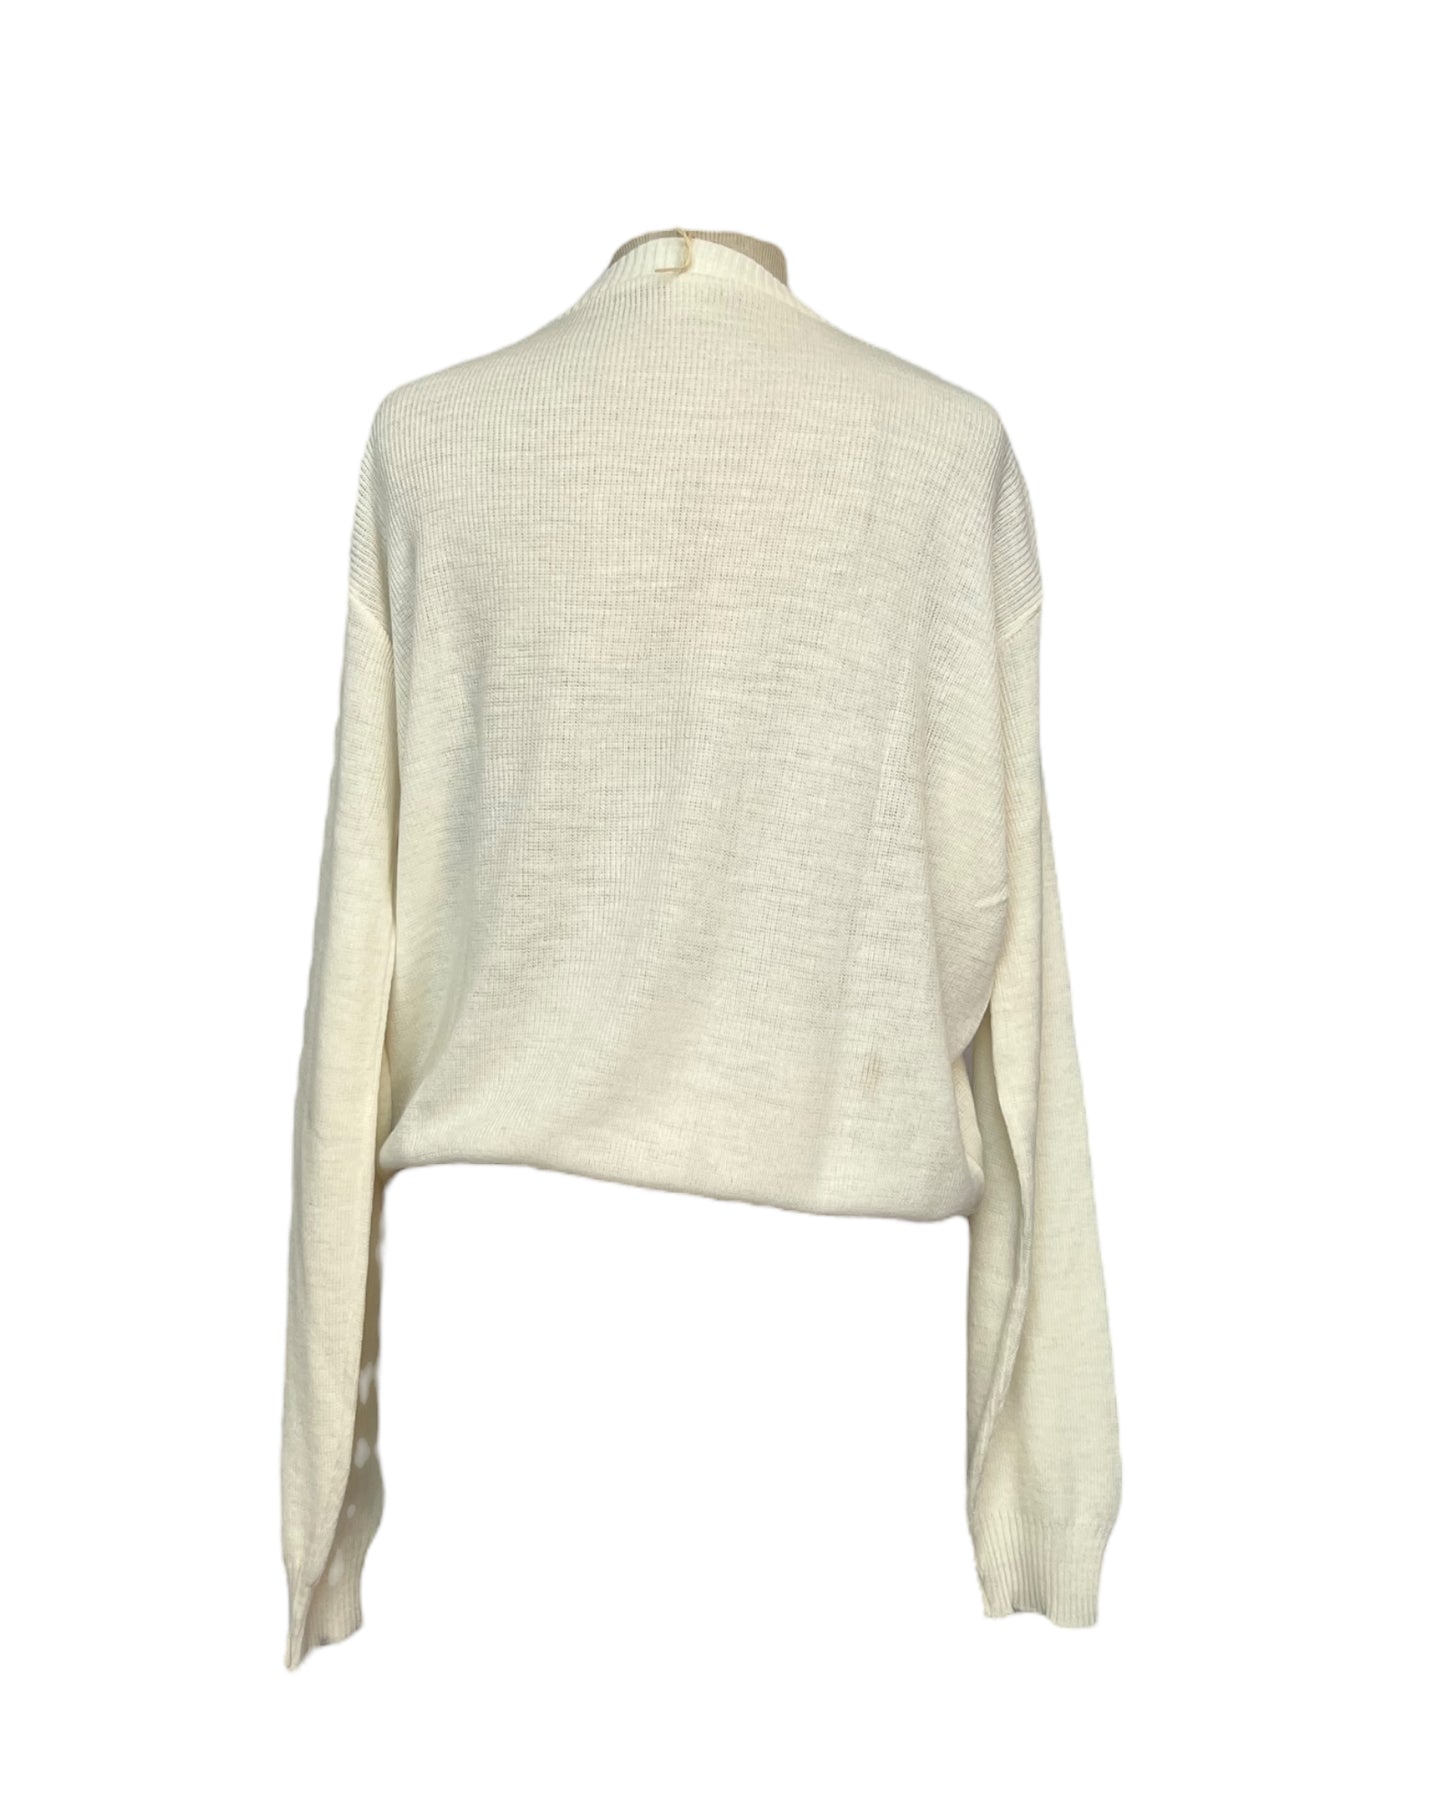 1980s The Ivy Edit Sweater